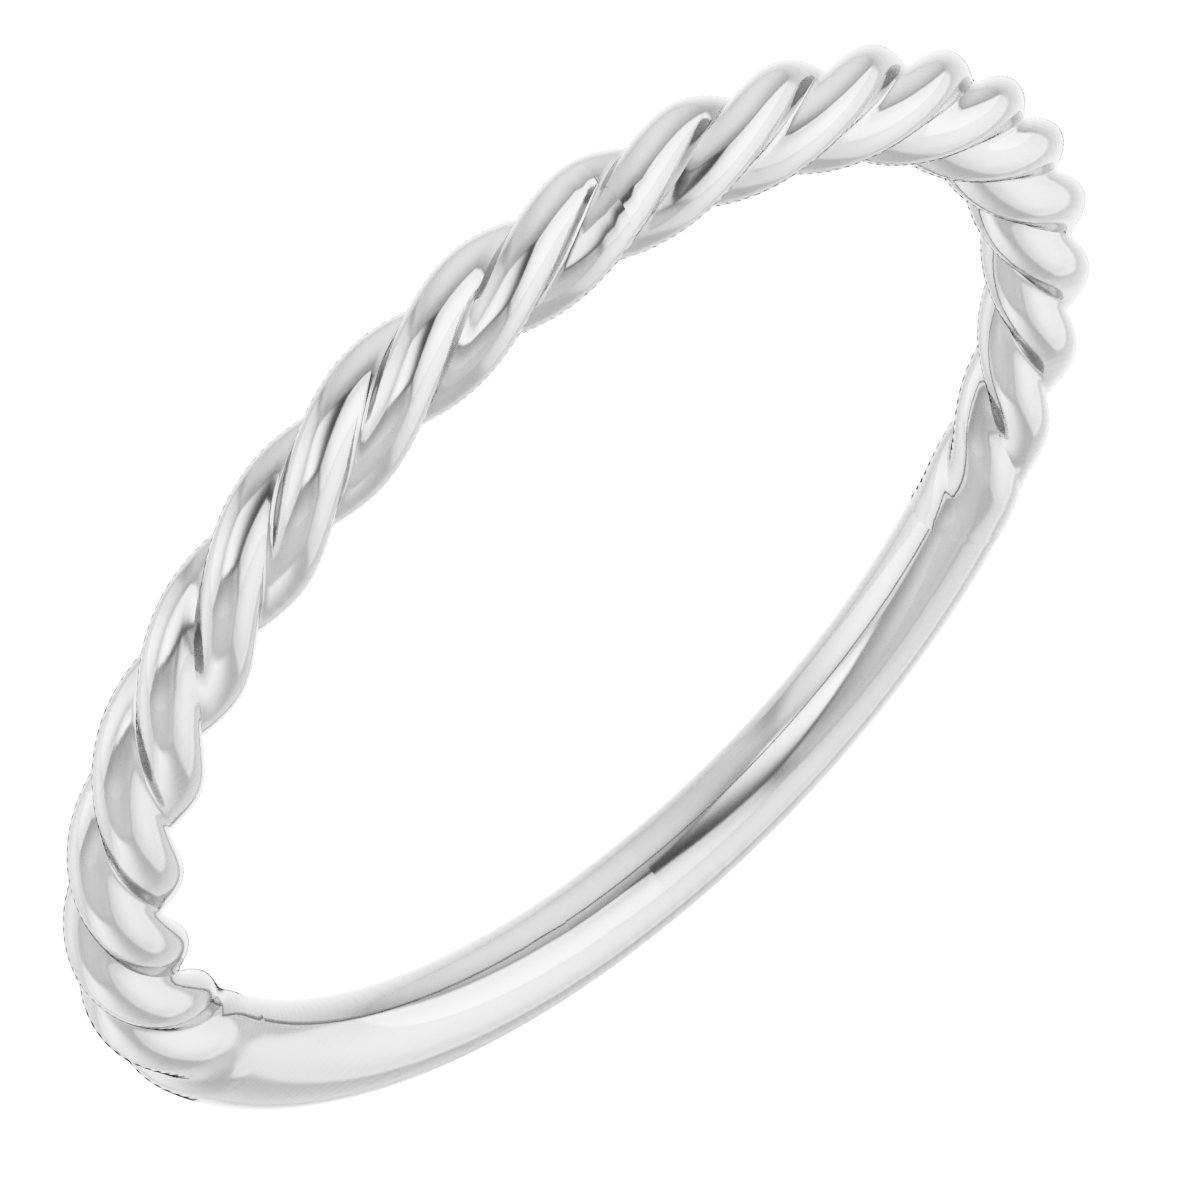 Platinum 1.7 mm Rope Band Size 7